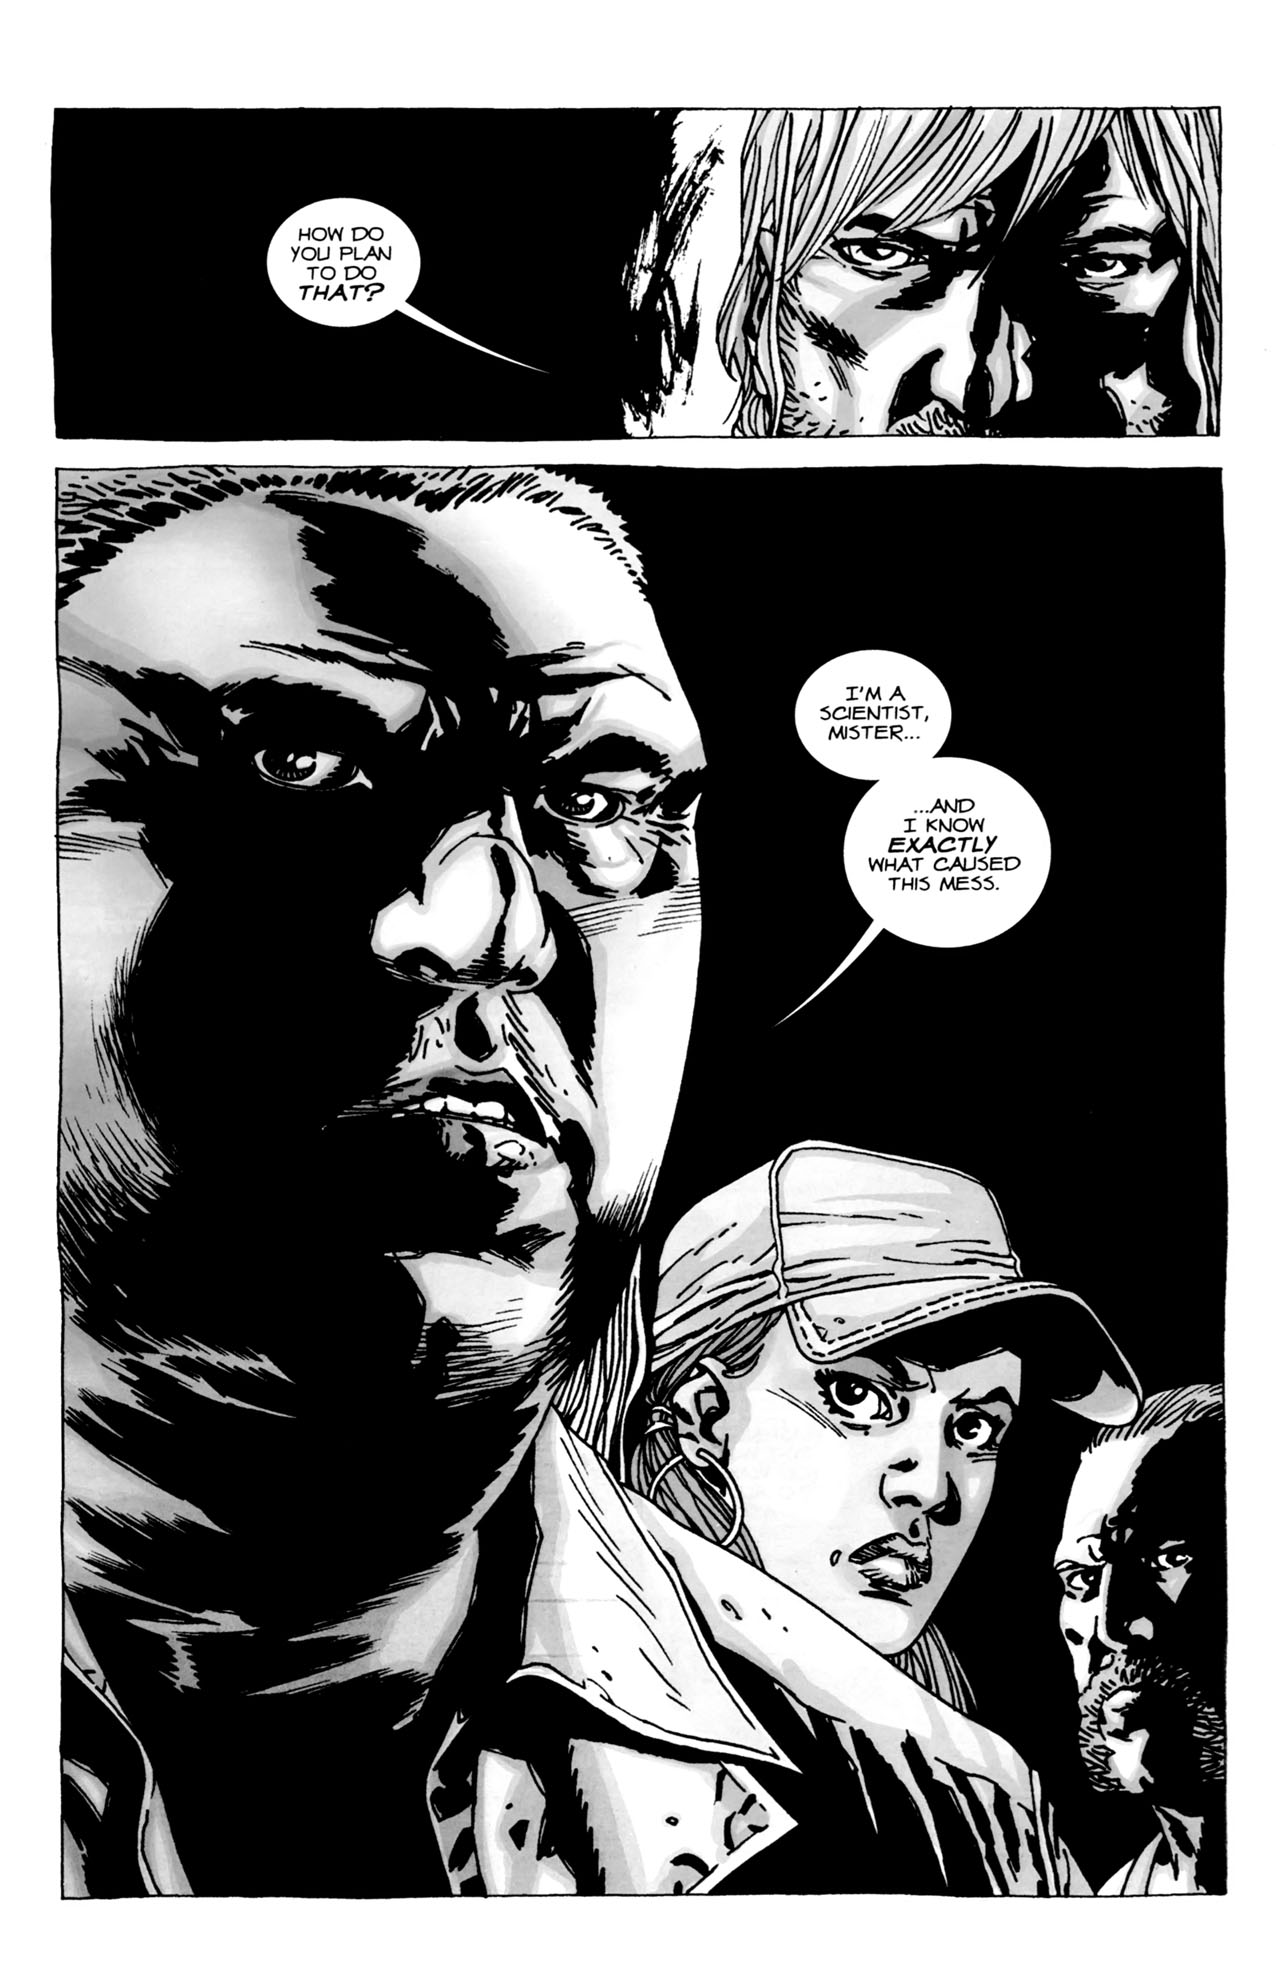 twd eugene comics - How Do You Plan To Do That? Ova I'M A Scientist, Mster... And I Know Exactly What Caused This Mess. ult